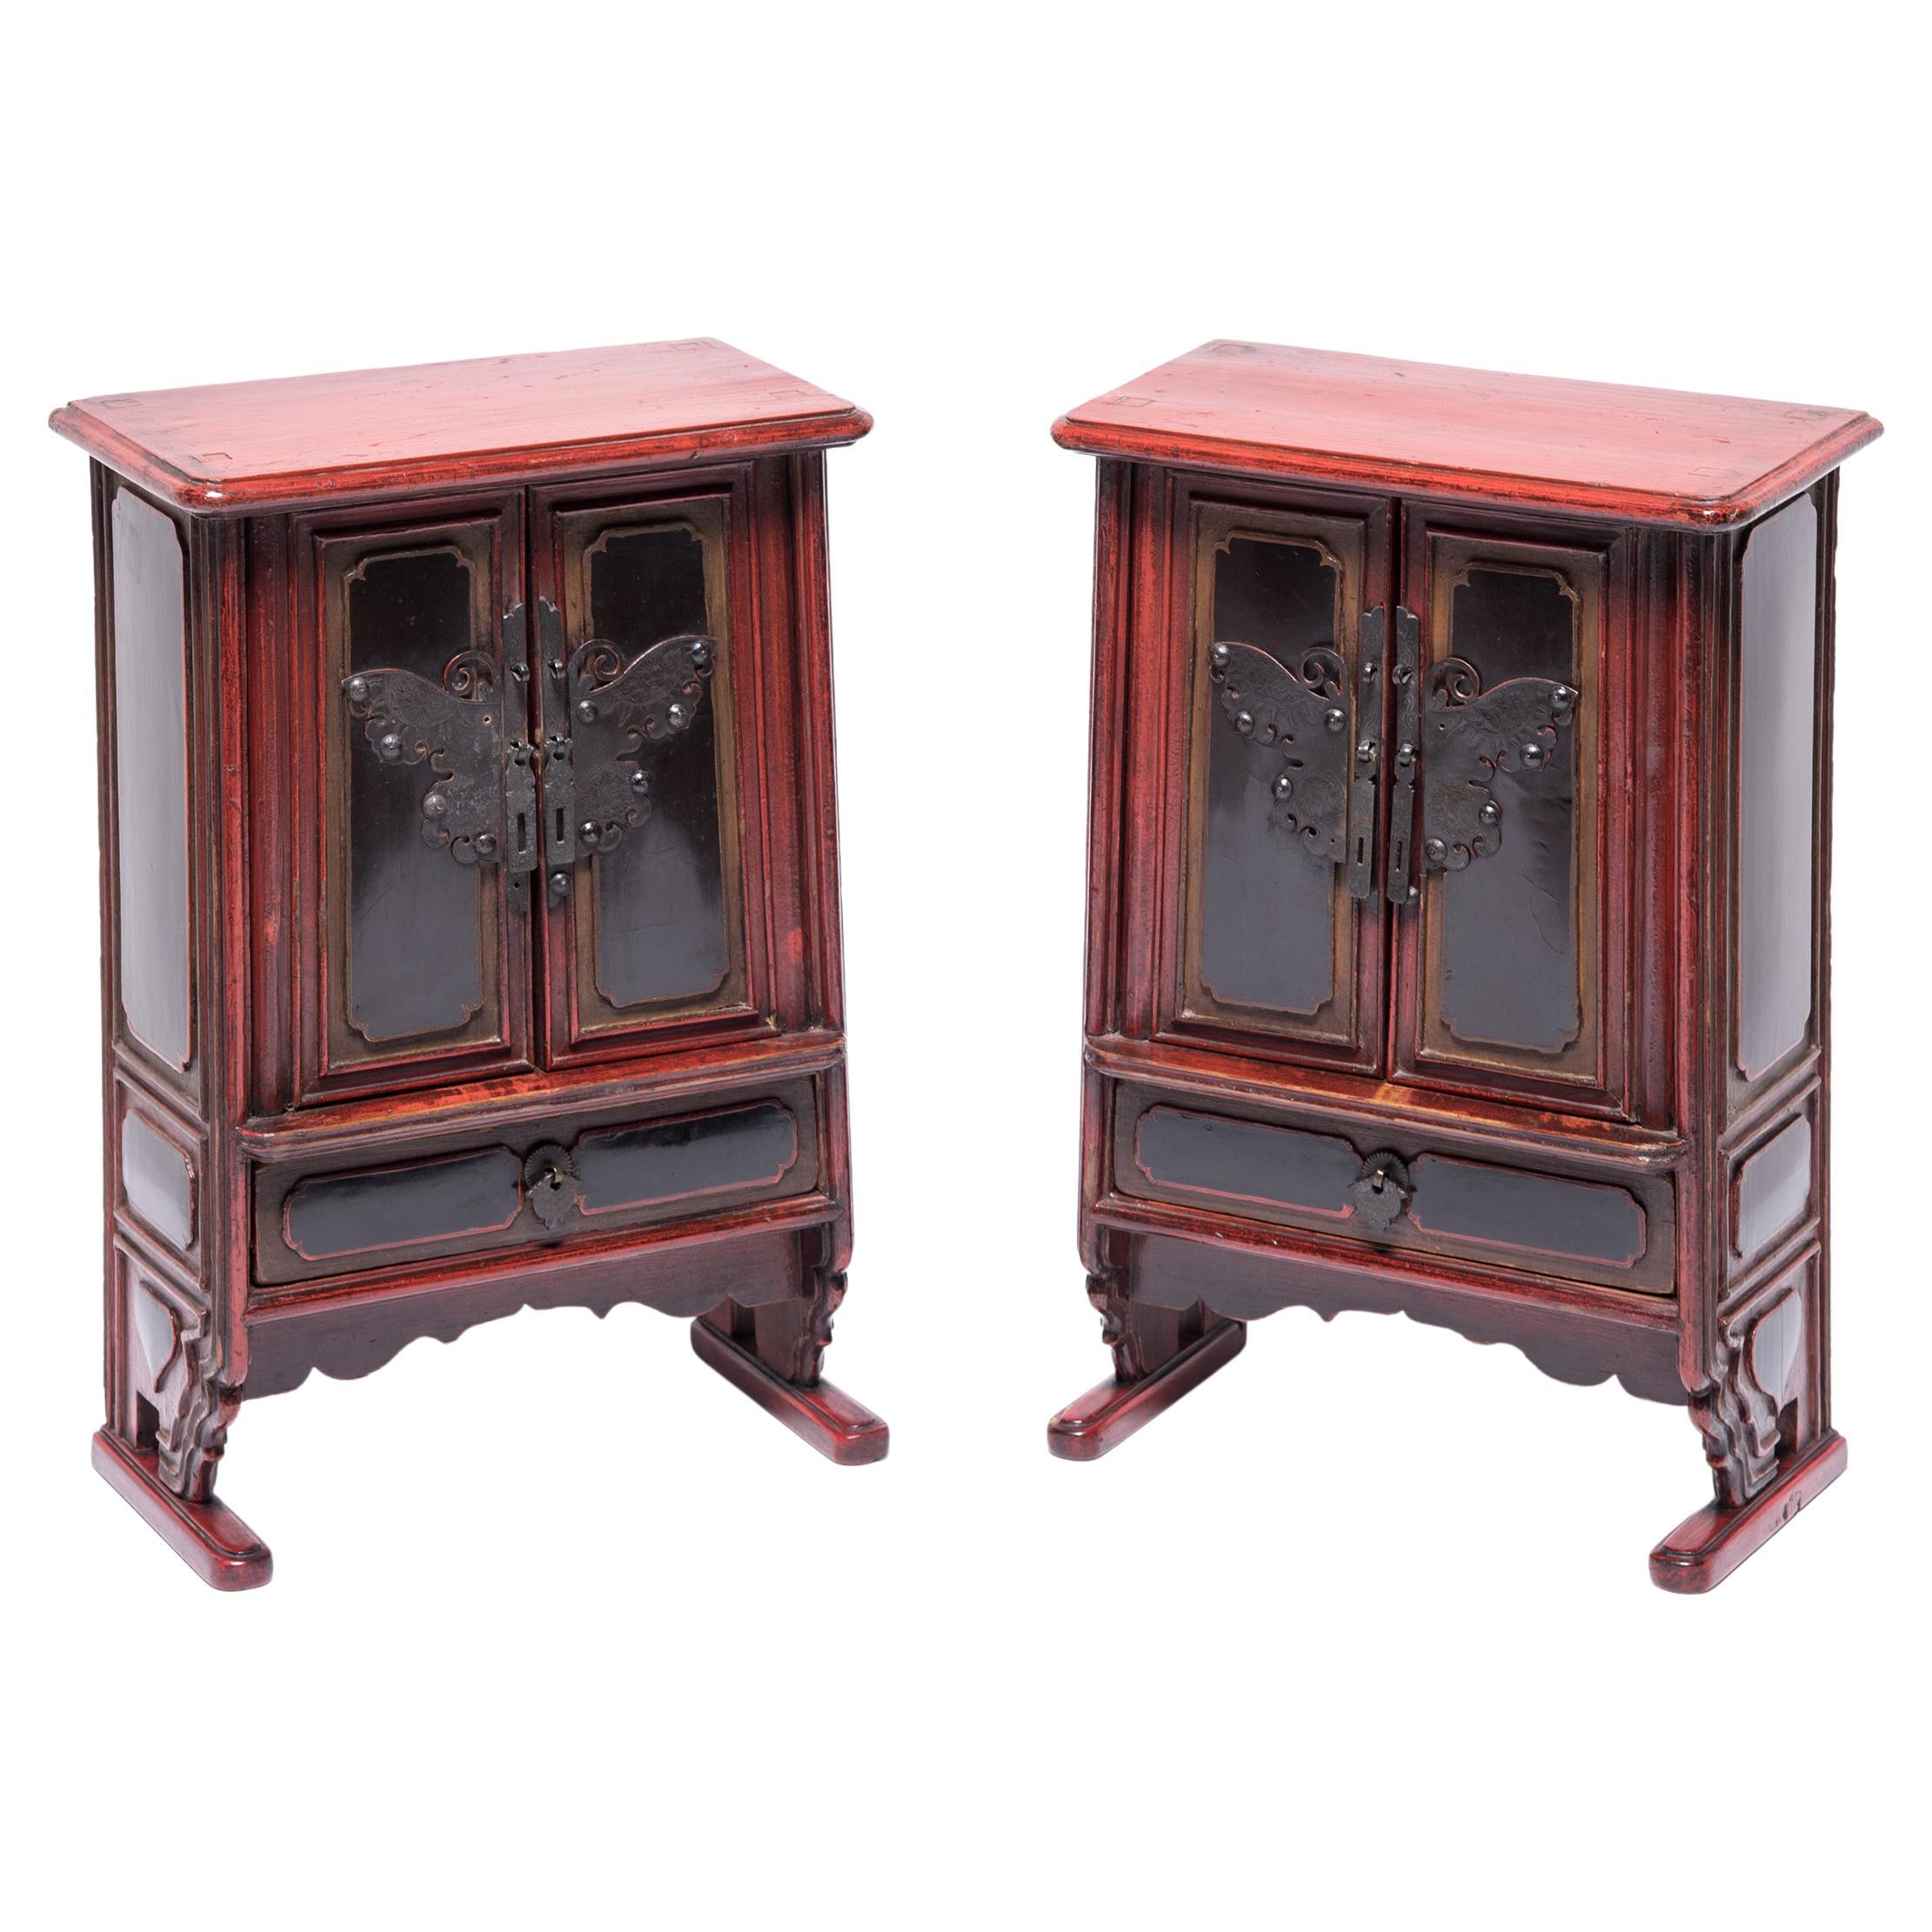 Pair of Petite Chinese Red Lacquer Butterfly Chests, c. 1900 For Sale